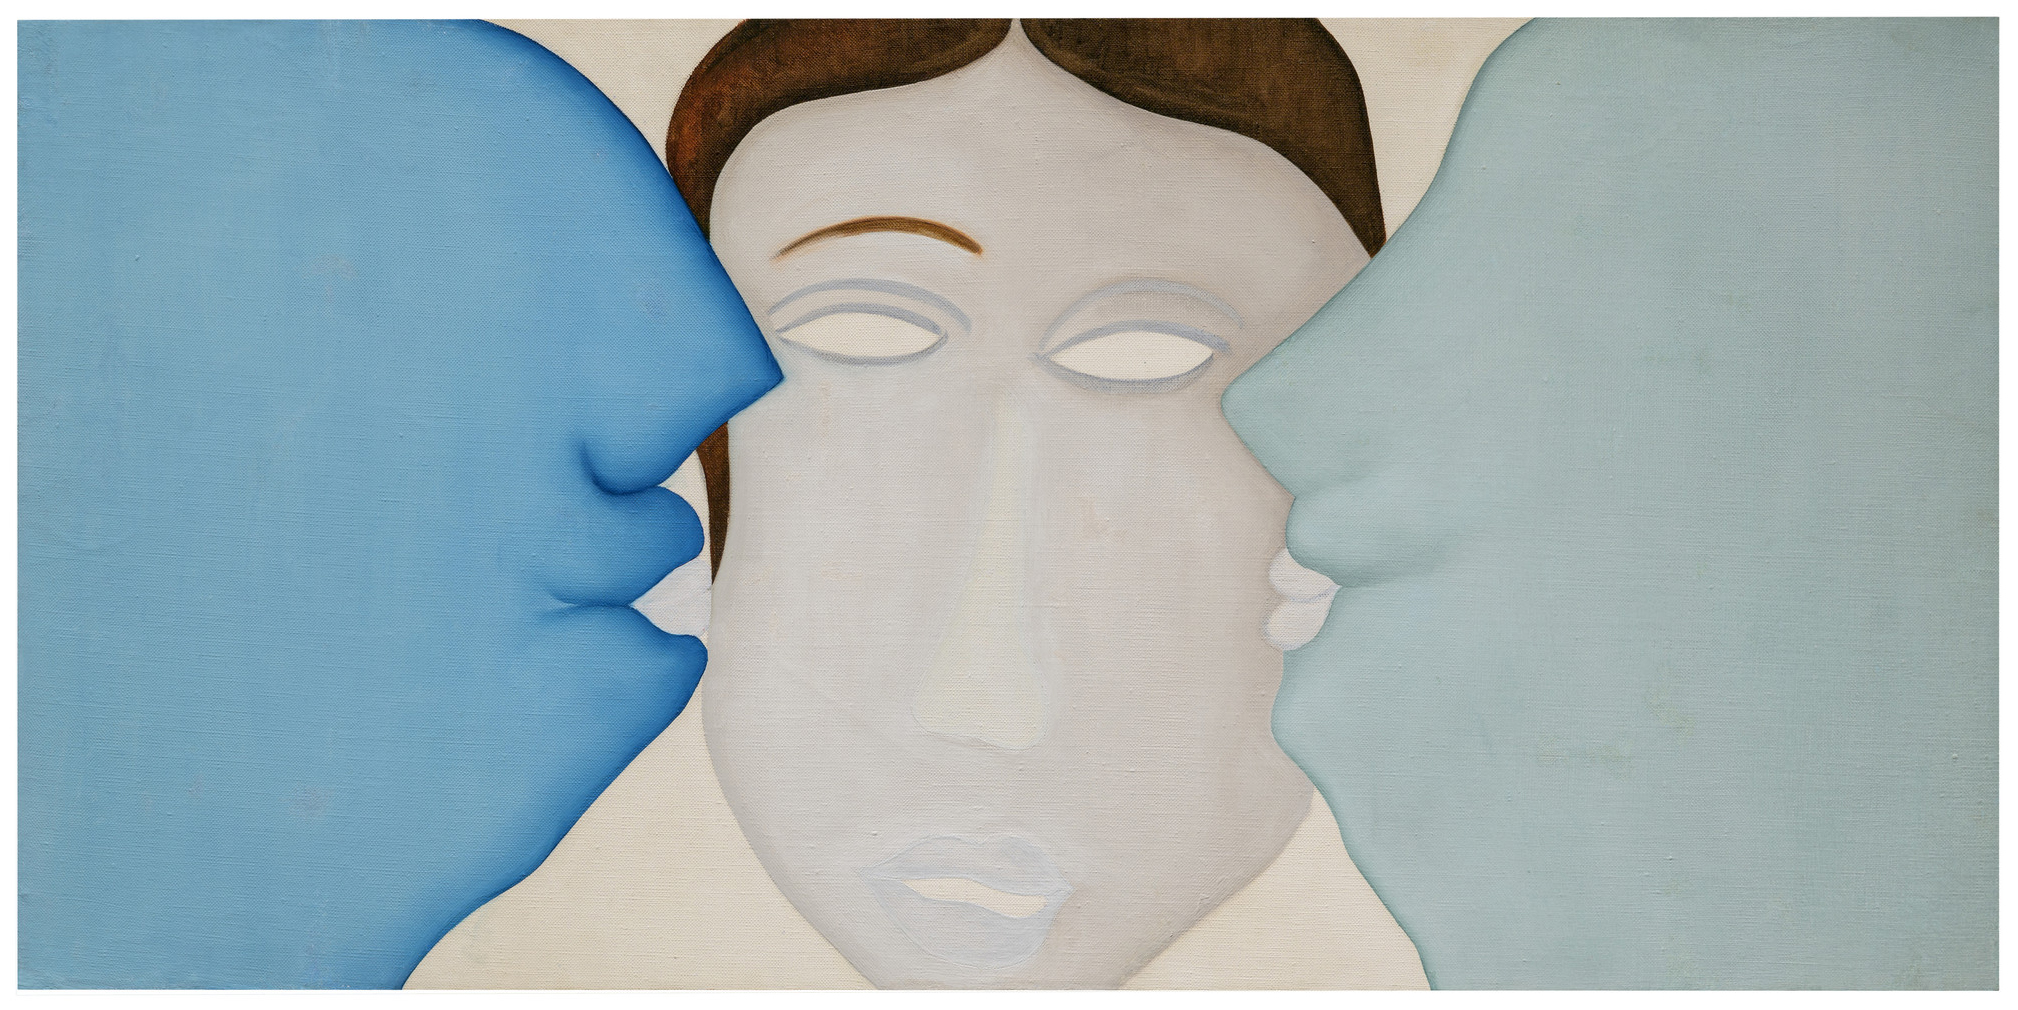 Huguette Caland, Huguette with Paul and Mustafa, 1970, Los Angeles County Museum of Art, purchased with funds provided by Contemporary Friends, 2015, © Huguette Caland, photo © Museum Associates/LACMA